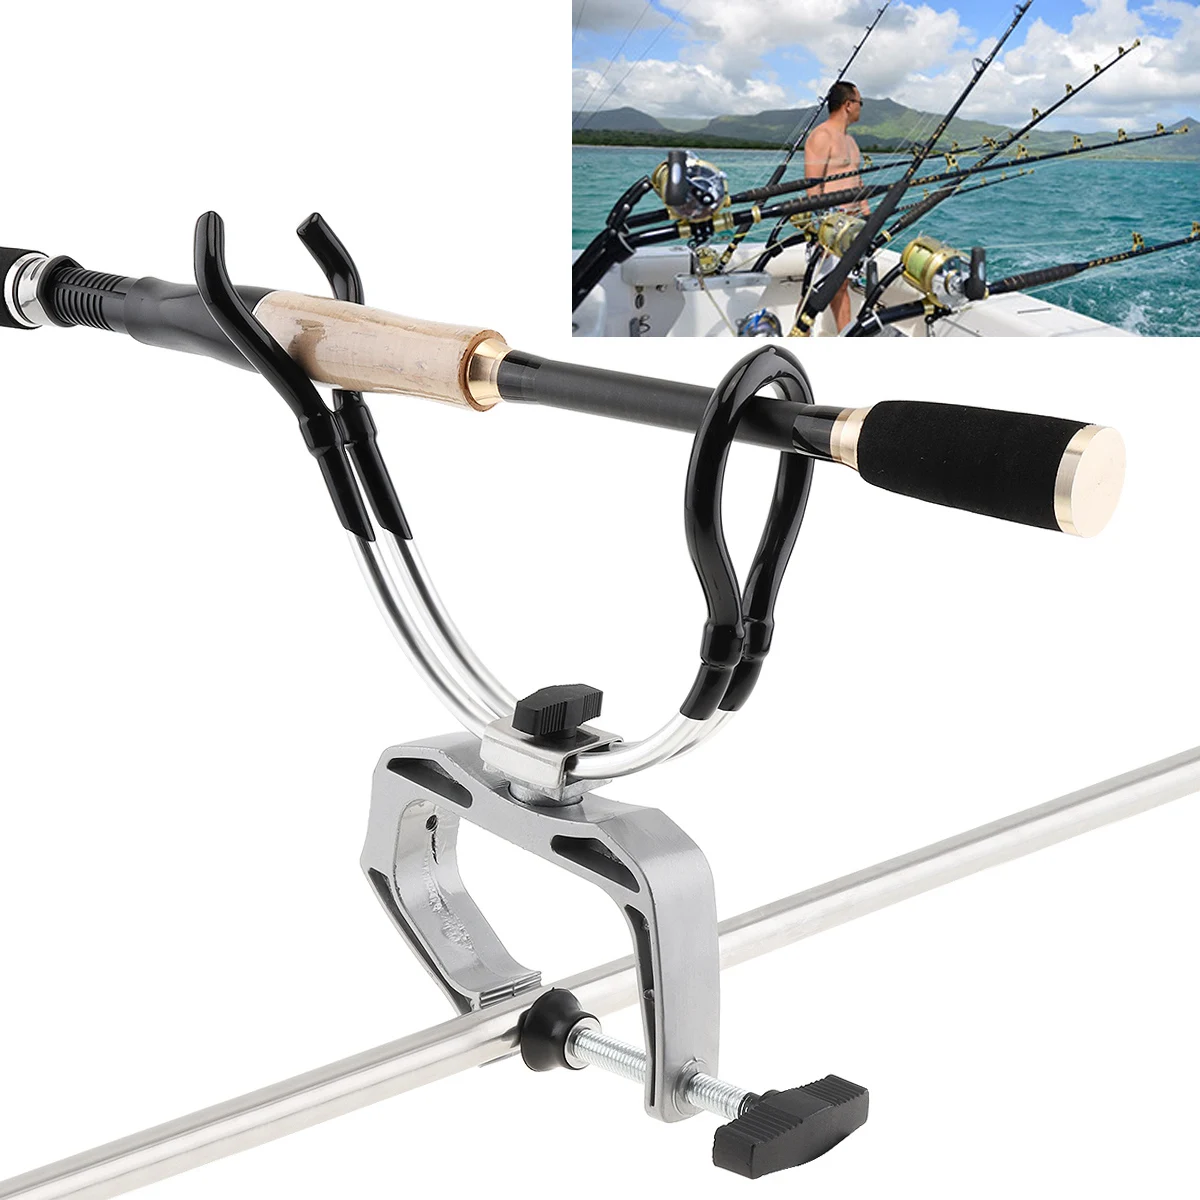 

Durable Stainless Steel Fishing Rod Support Stand Clamp Holder for Boat Canoe and Kayak Handrail